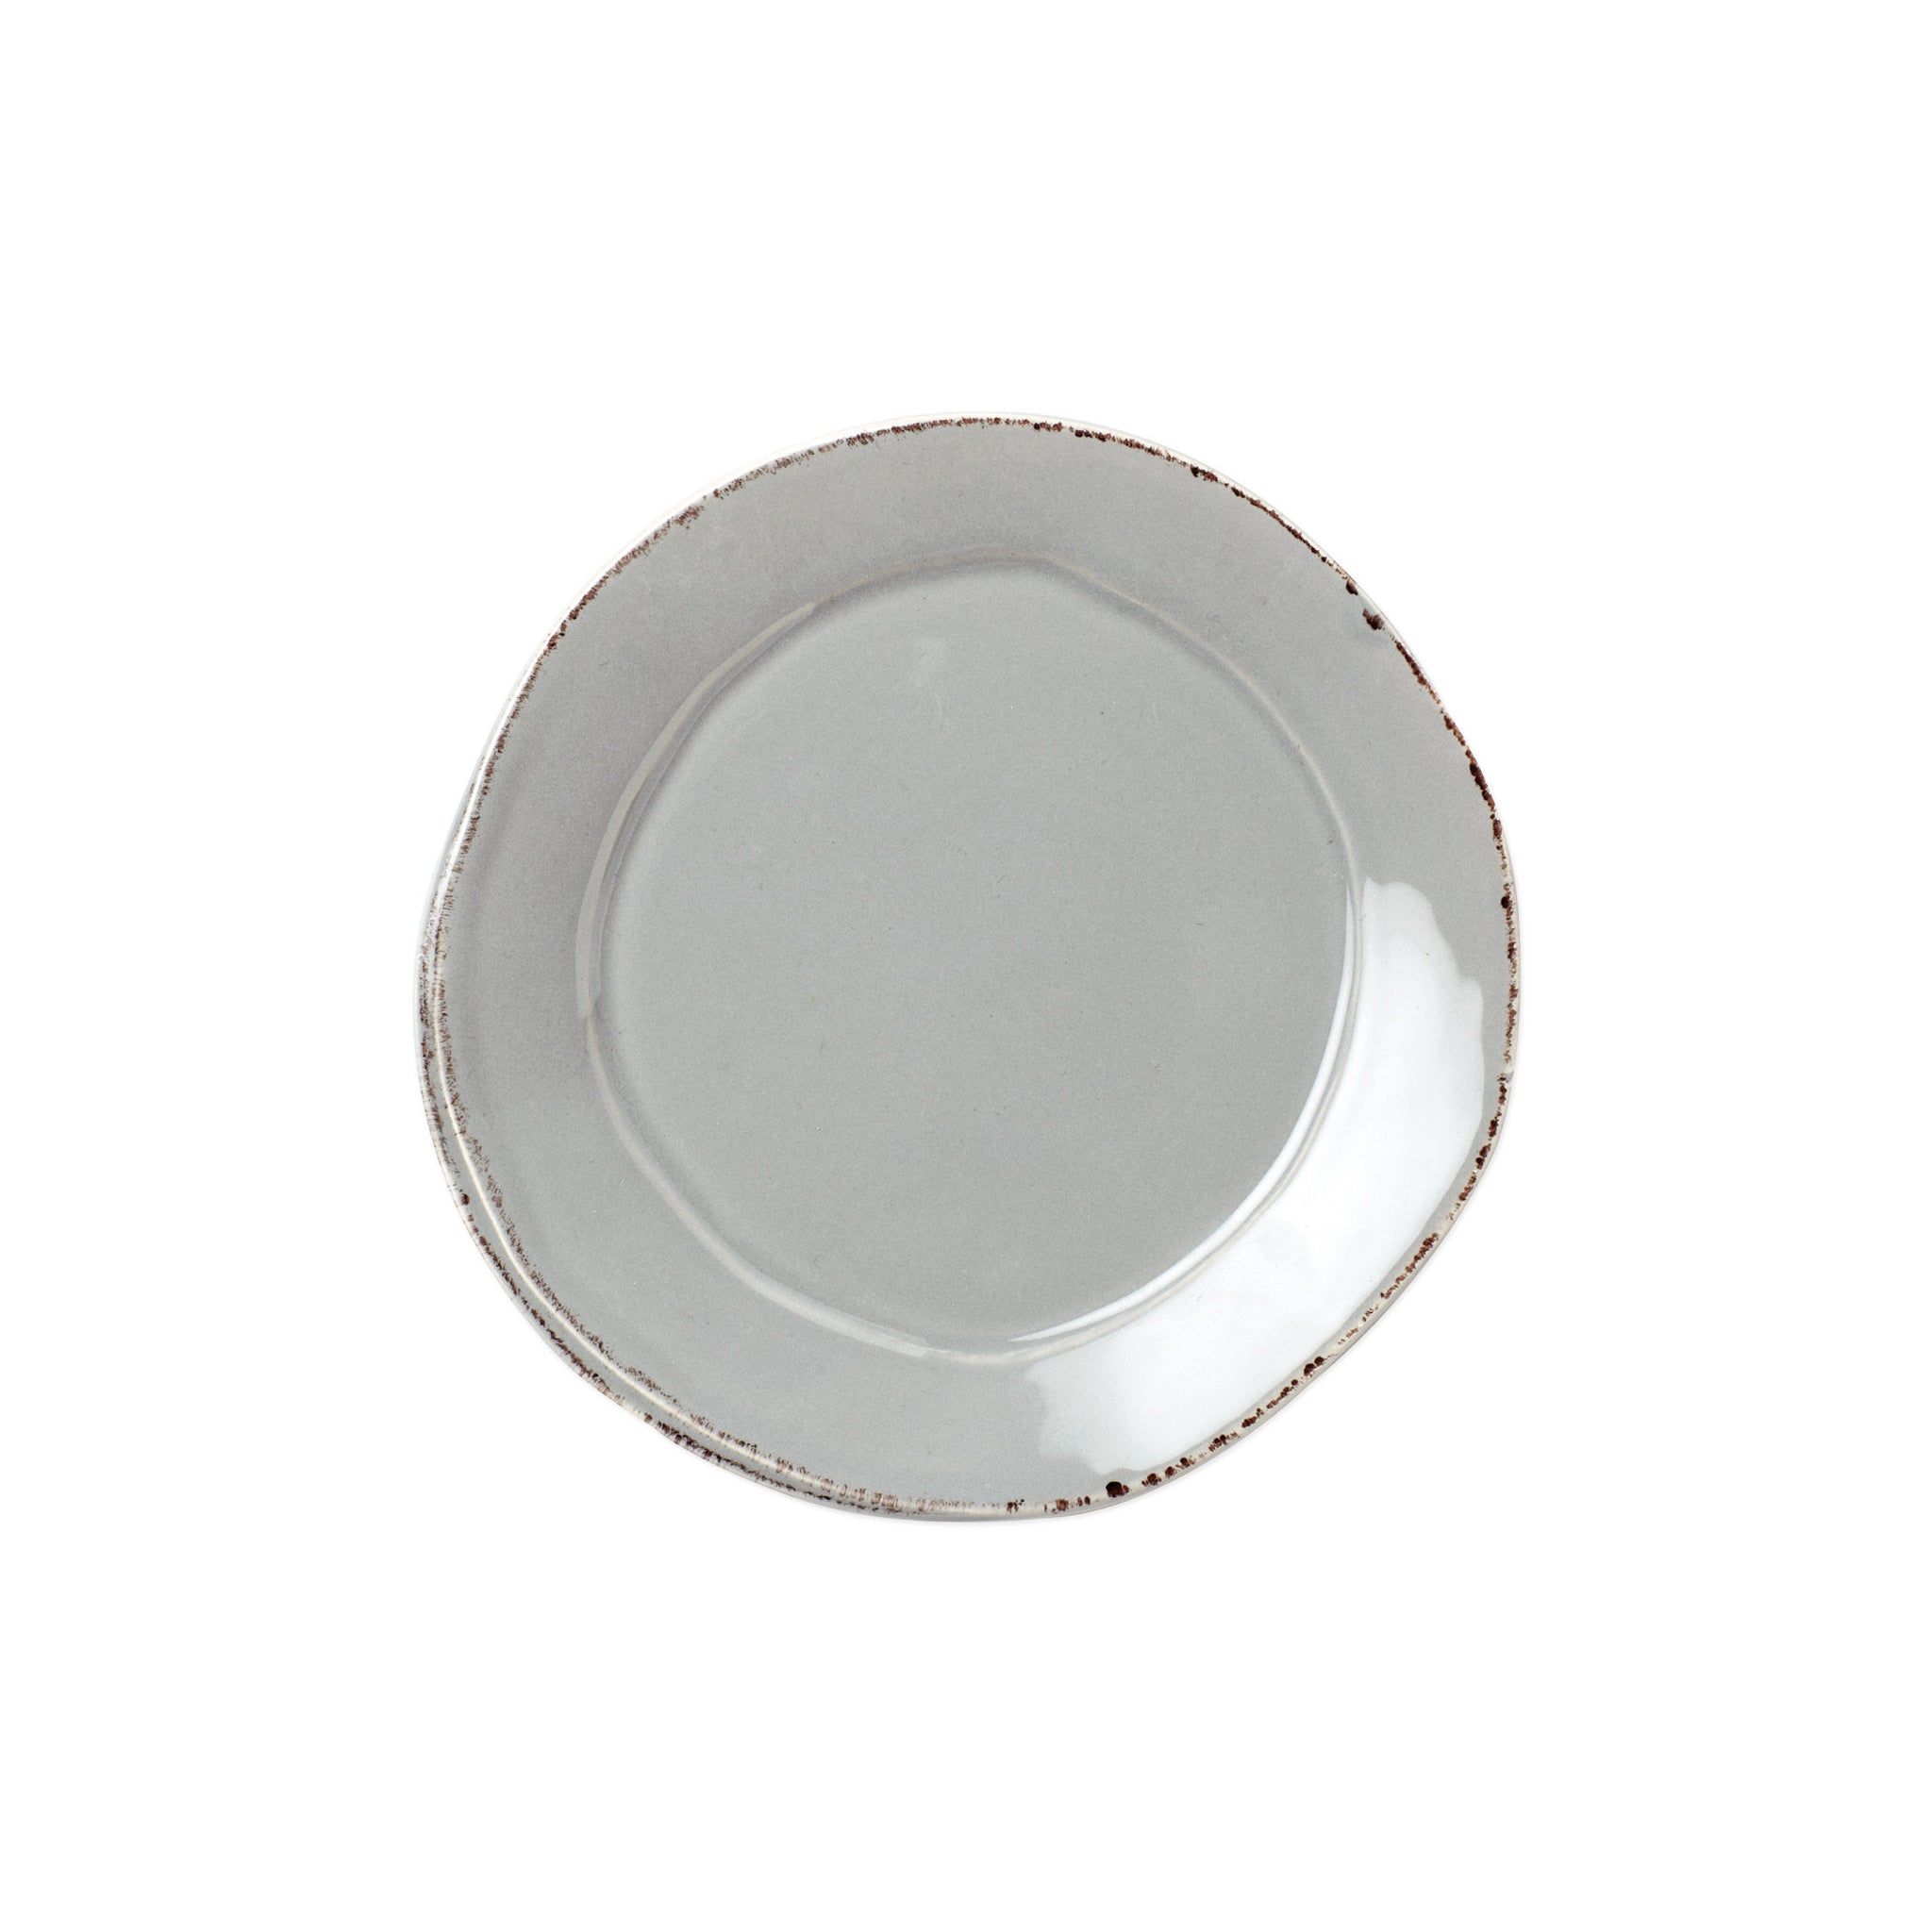 Lastra Canape Plate - Set of 4 - Gray